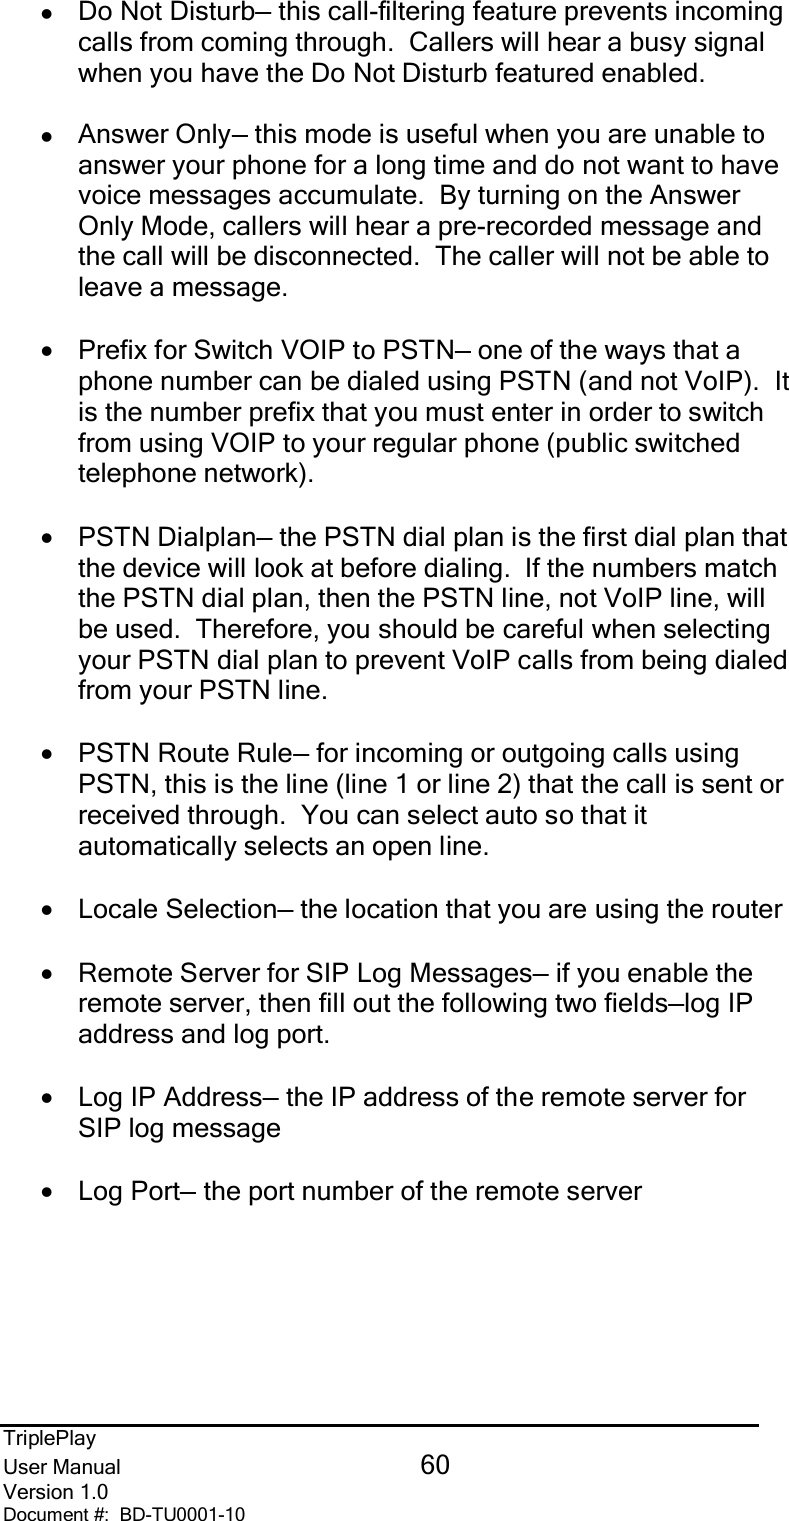 TriplePlayUser Manual 60Version 1.0Document #:  BD-TU0001-10zDo Not Disturb— this call-filtering feature prevents incomingcalls from coming through.  Callers will hear a busy signalwhen you have the Do Not Disturb featured enabled.zAnswer Only— this mode is useful when you are unable toanswer your phone for a long time and do not want to havevoice messages accumulate.  By turning on the AnswerOnly Mode, callers will hear a pre-recorded message andthe call will be disconnected.  The caller will not be able toleave a message.•Prefix for Switch VOIP to PSTN— one of the ways that aphone number can be dialed using PSTN (and not VoIP).  Itis the number prefix that you must enter in order to switchfrom using VOIP to your regular phone (public switchedtelephone network).•PSTN Dialplan— the PSTN dial plan is the first dial plan thatthe device will look at before dialing.  If the numbers matchthe PSTN dial plan, then the PSTN line, not VoIP line, willbe used.  Therefore, you should be careful when selectingyour PSTN dial plan to prevent VoIP calls from being dialedfrom your PSTN line.•PSTN Route Rule— for incoming or outgoing calls usingPSTN, this is the line (line 1 or line 2) that the call is sent orreceived through.  You can select auto so that itautomatically selects an open line.•Locale Selection— the location that you are using the router•Remote Server for SIP Log Messages— if you enable theremote server, then fill out the following two fields—log IPaddress and log port.•Log IP Address— the IP address of the remote server forSIP log message•Log Port— the port number of the remote server